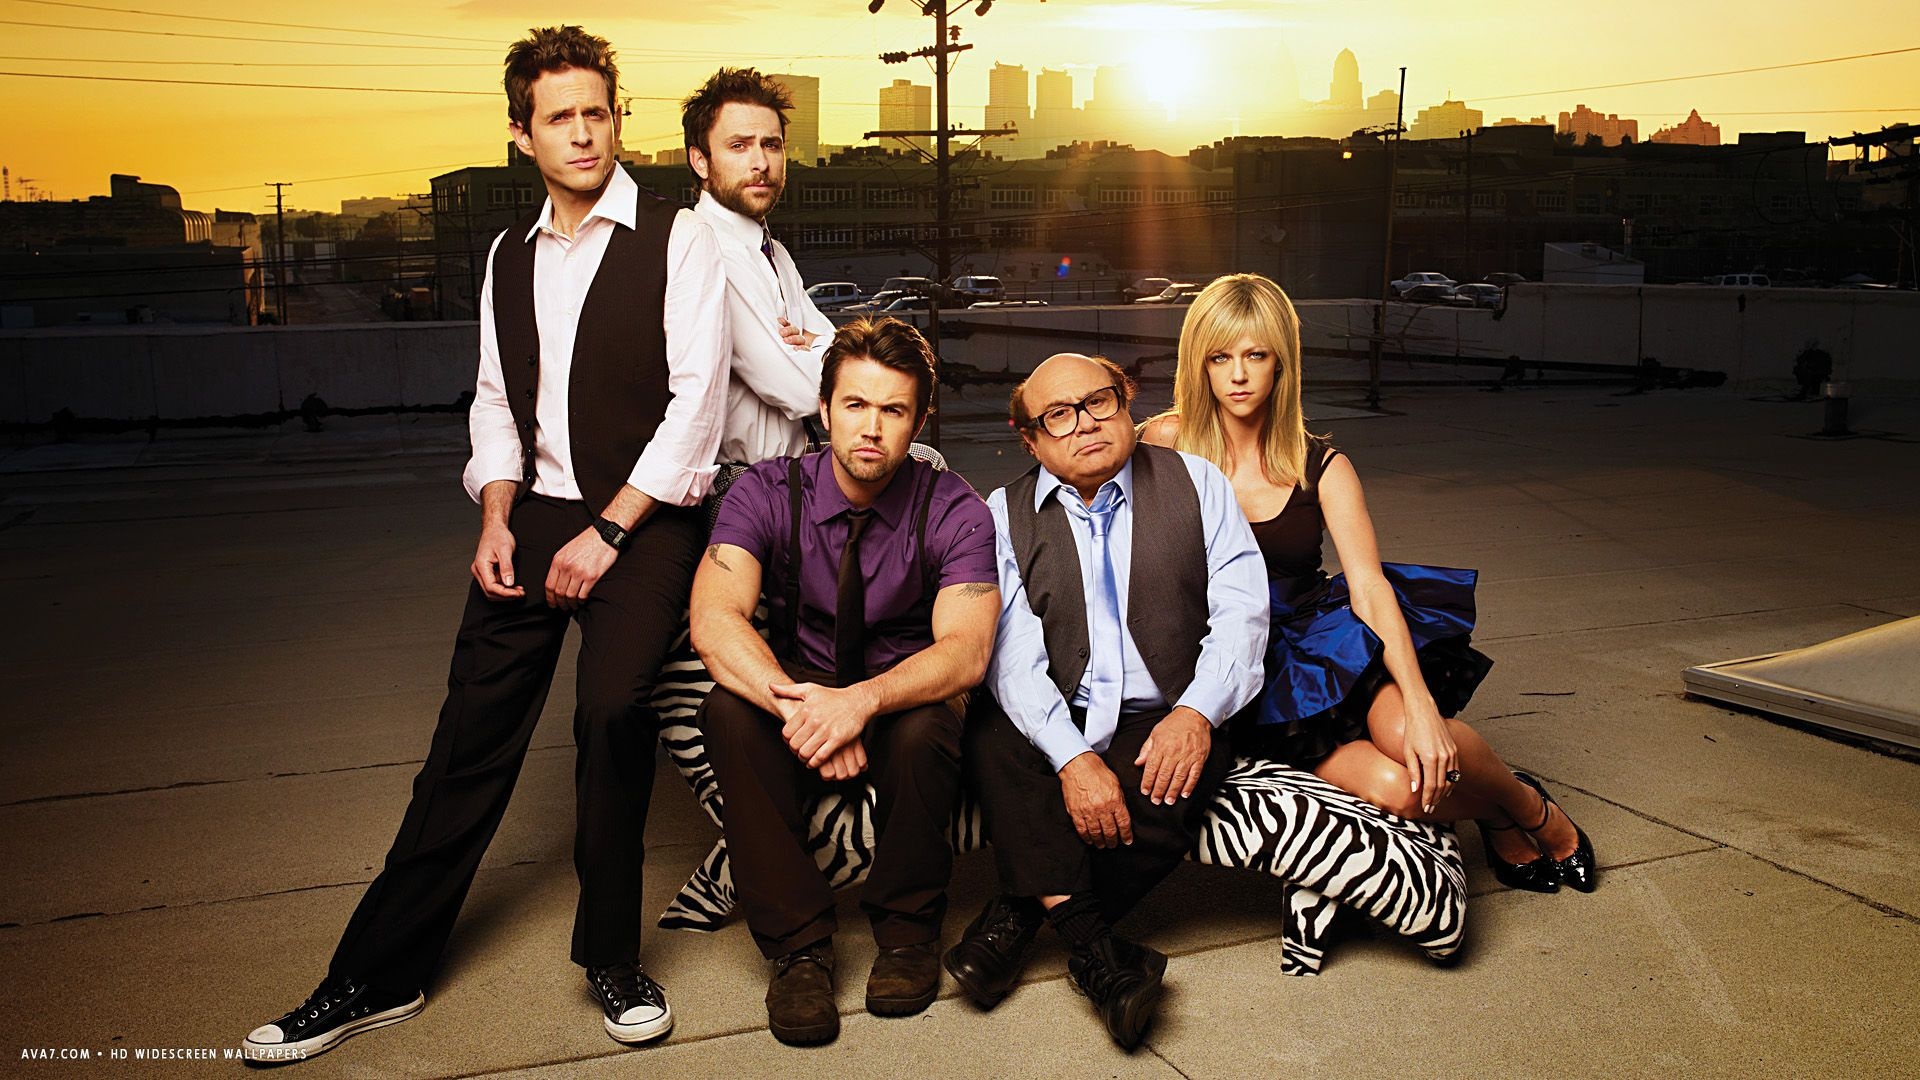 It's Always Sunny in Philadelphia (TV Series): Sitcom consisting of 15 seasons, 162 episodes, Mac, Charlie, Dennis, Frank and Dee. 1920x1080 Full HD Background.